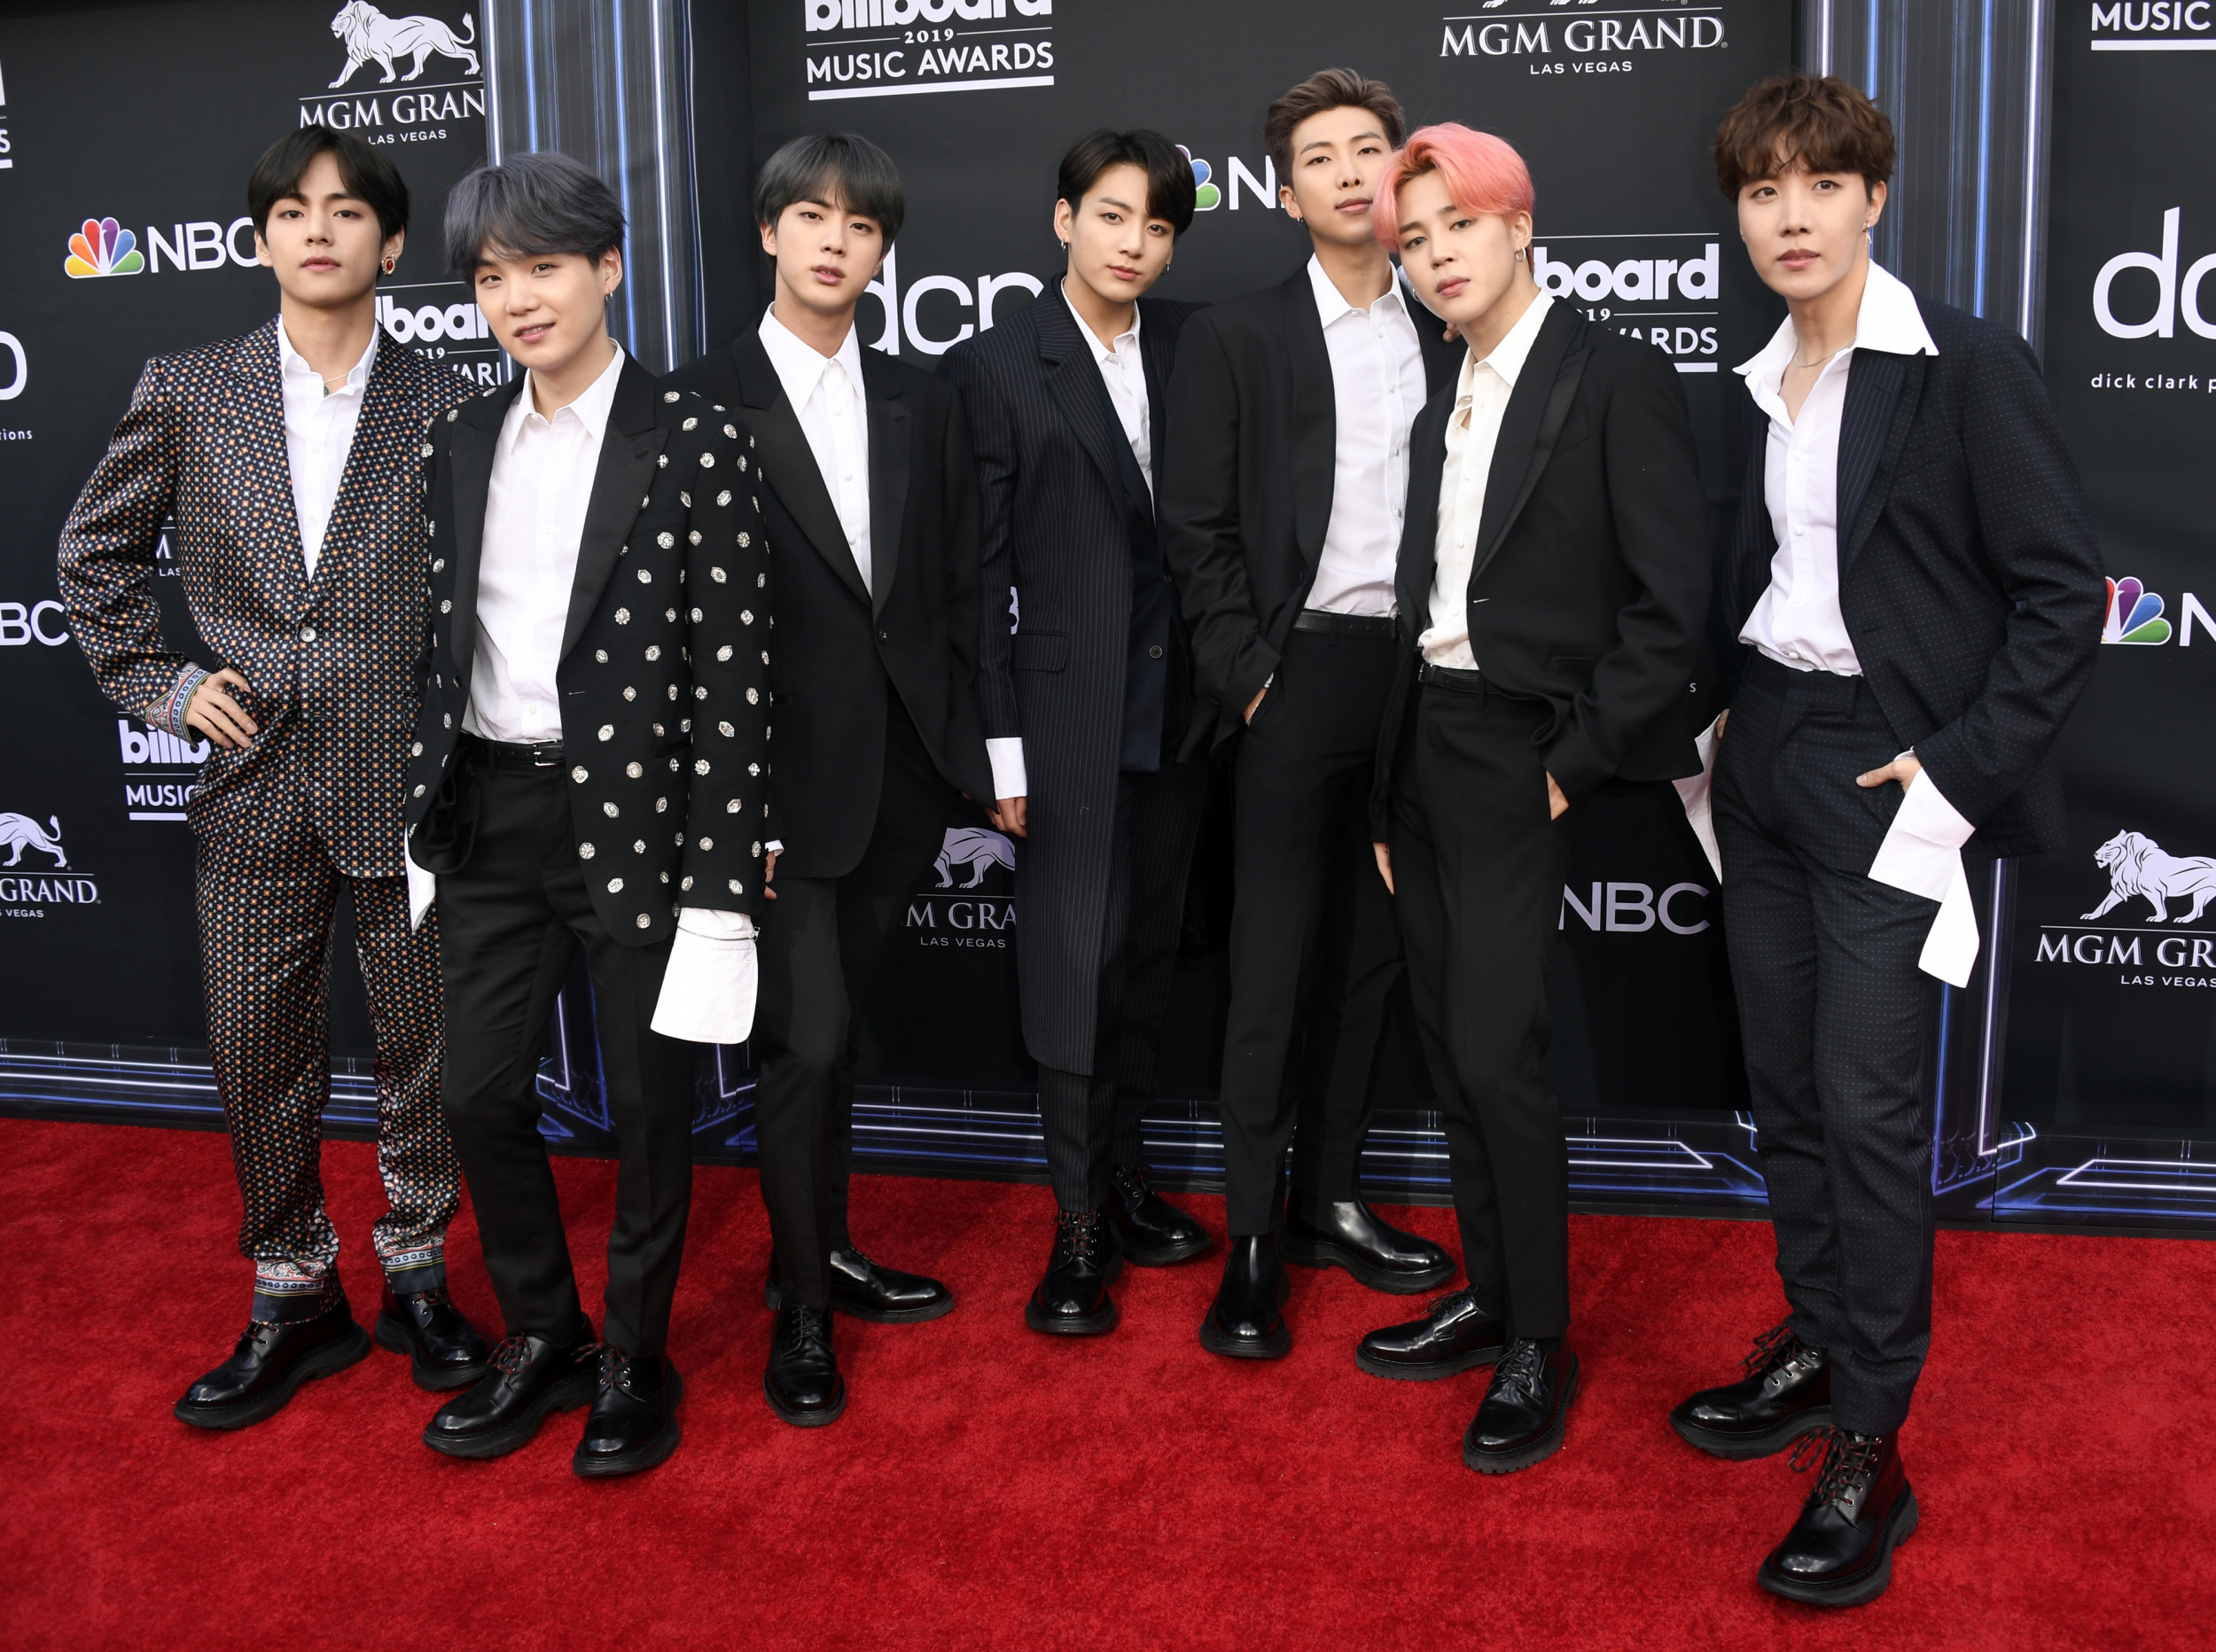 BTS & The GRAMMYs: The History of BTS' Involvement with The GRAMMY Awards